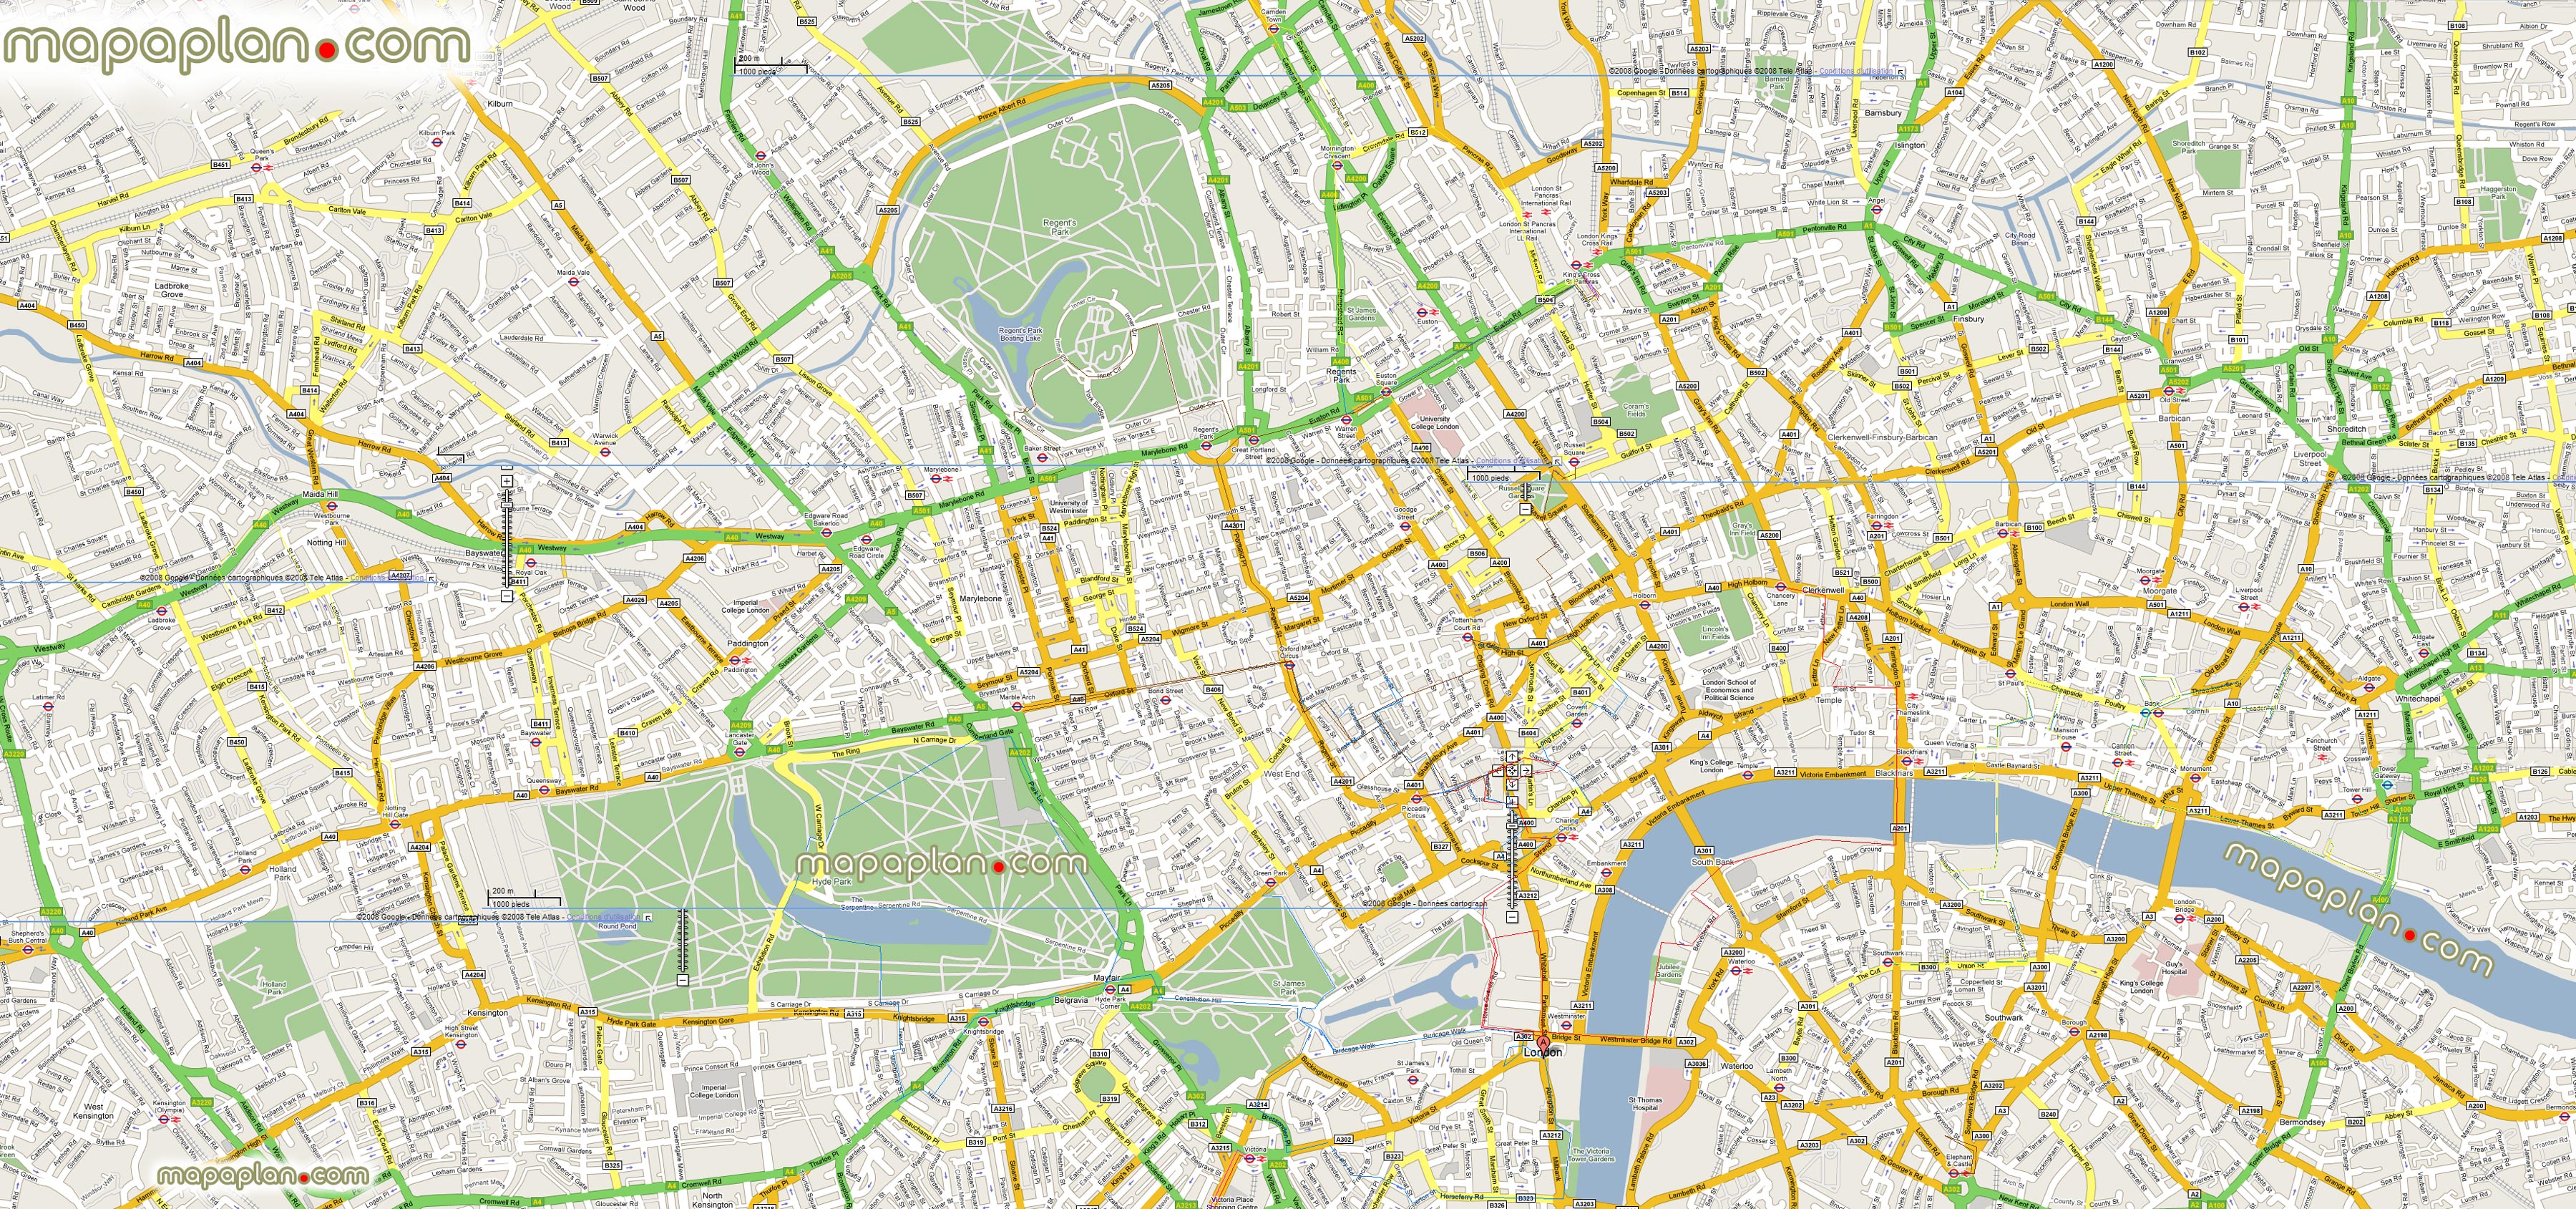 Printable Map Of London Tourist Attractions